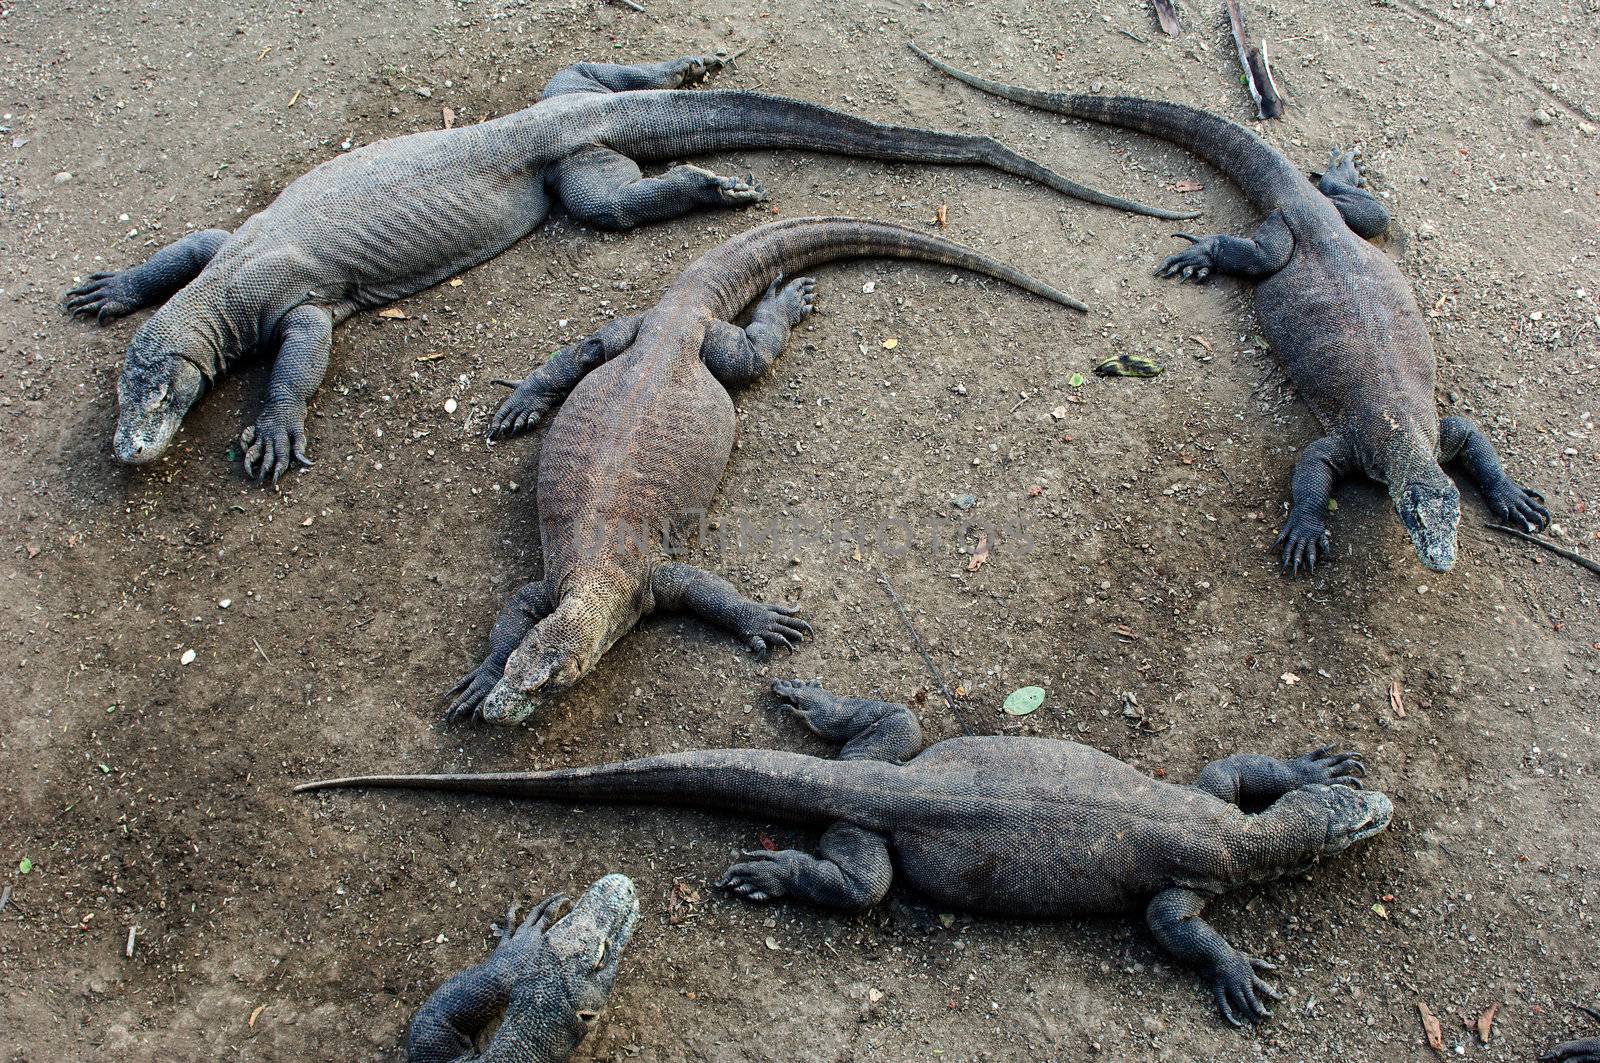 Komodo dragons have a rest. by SURZ